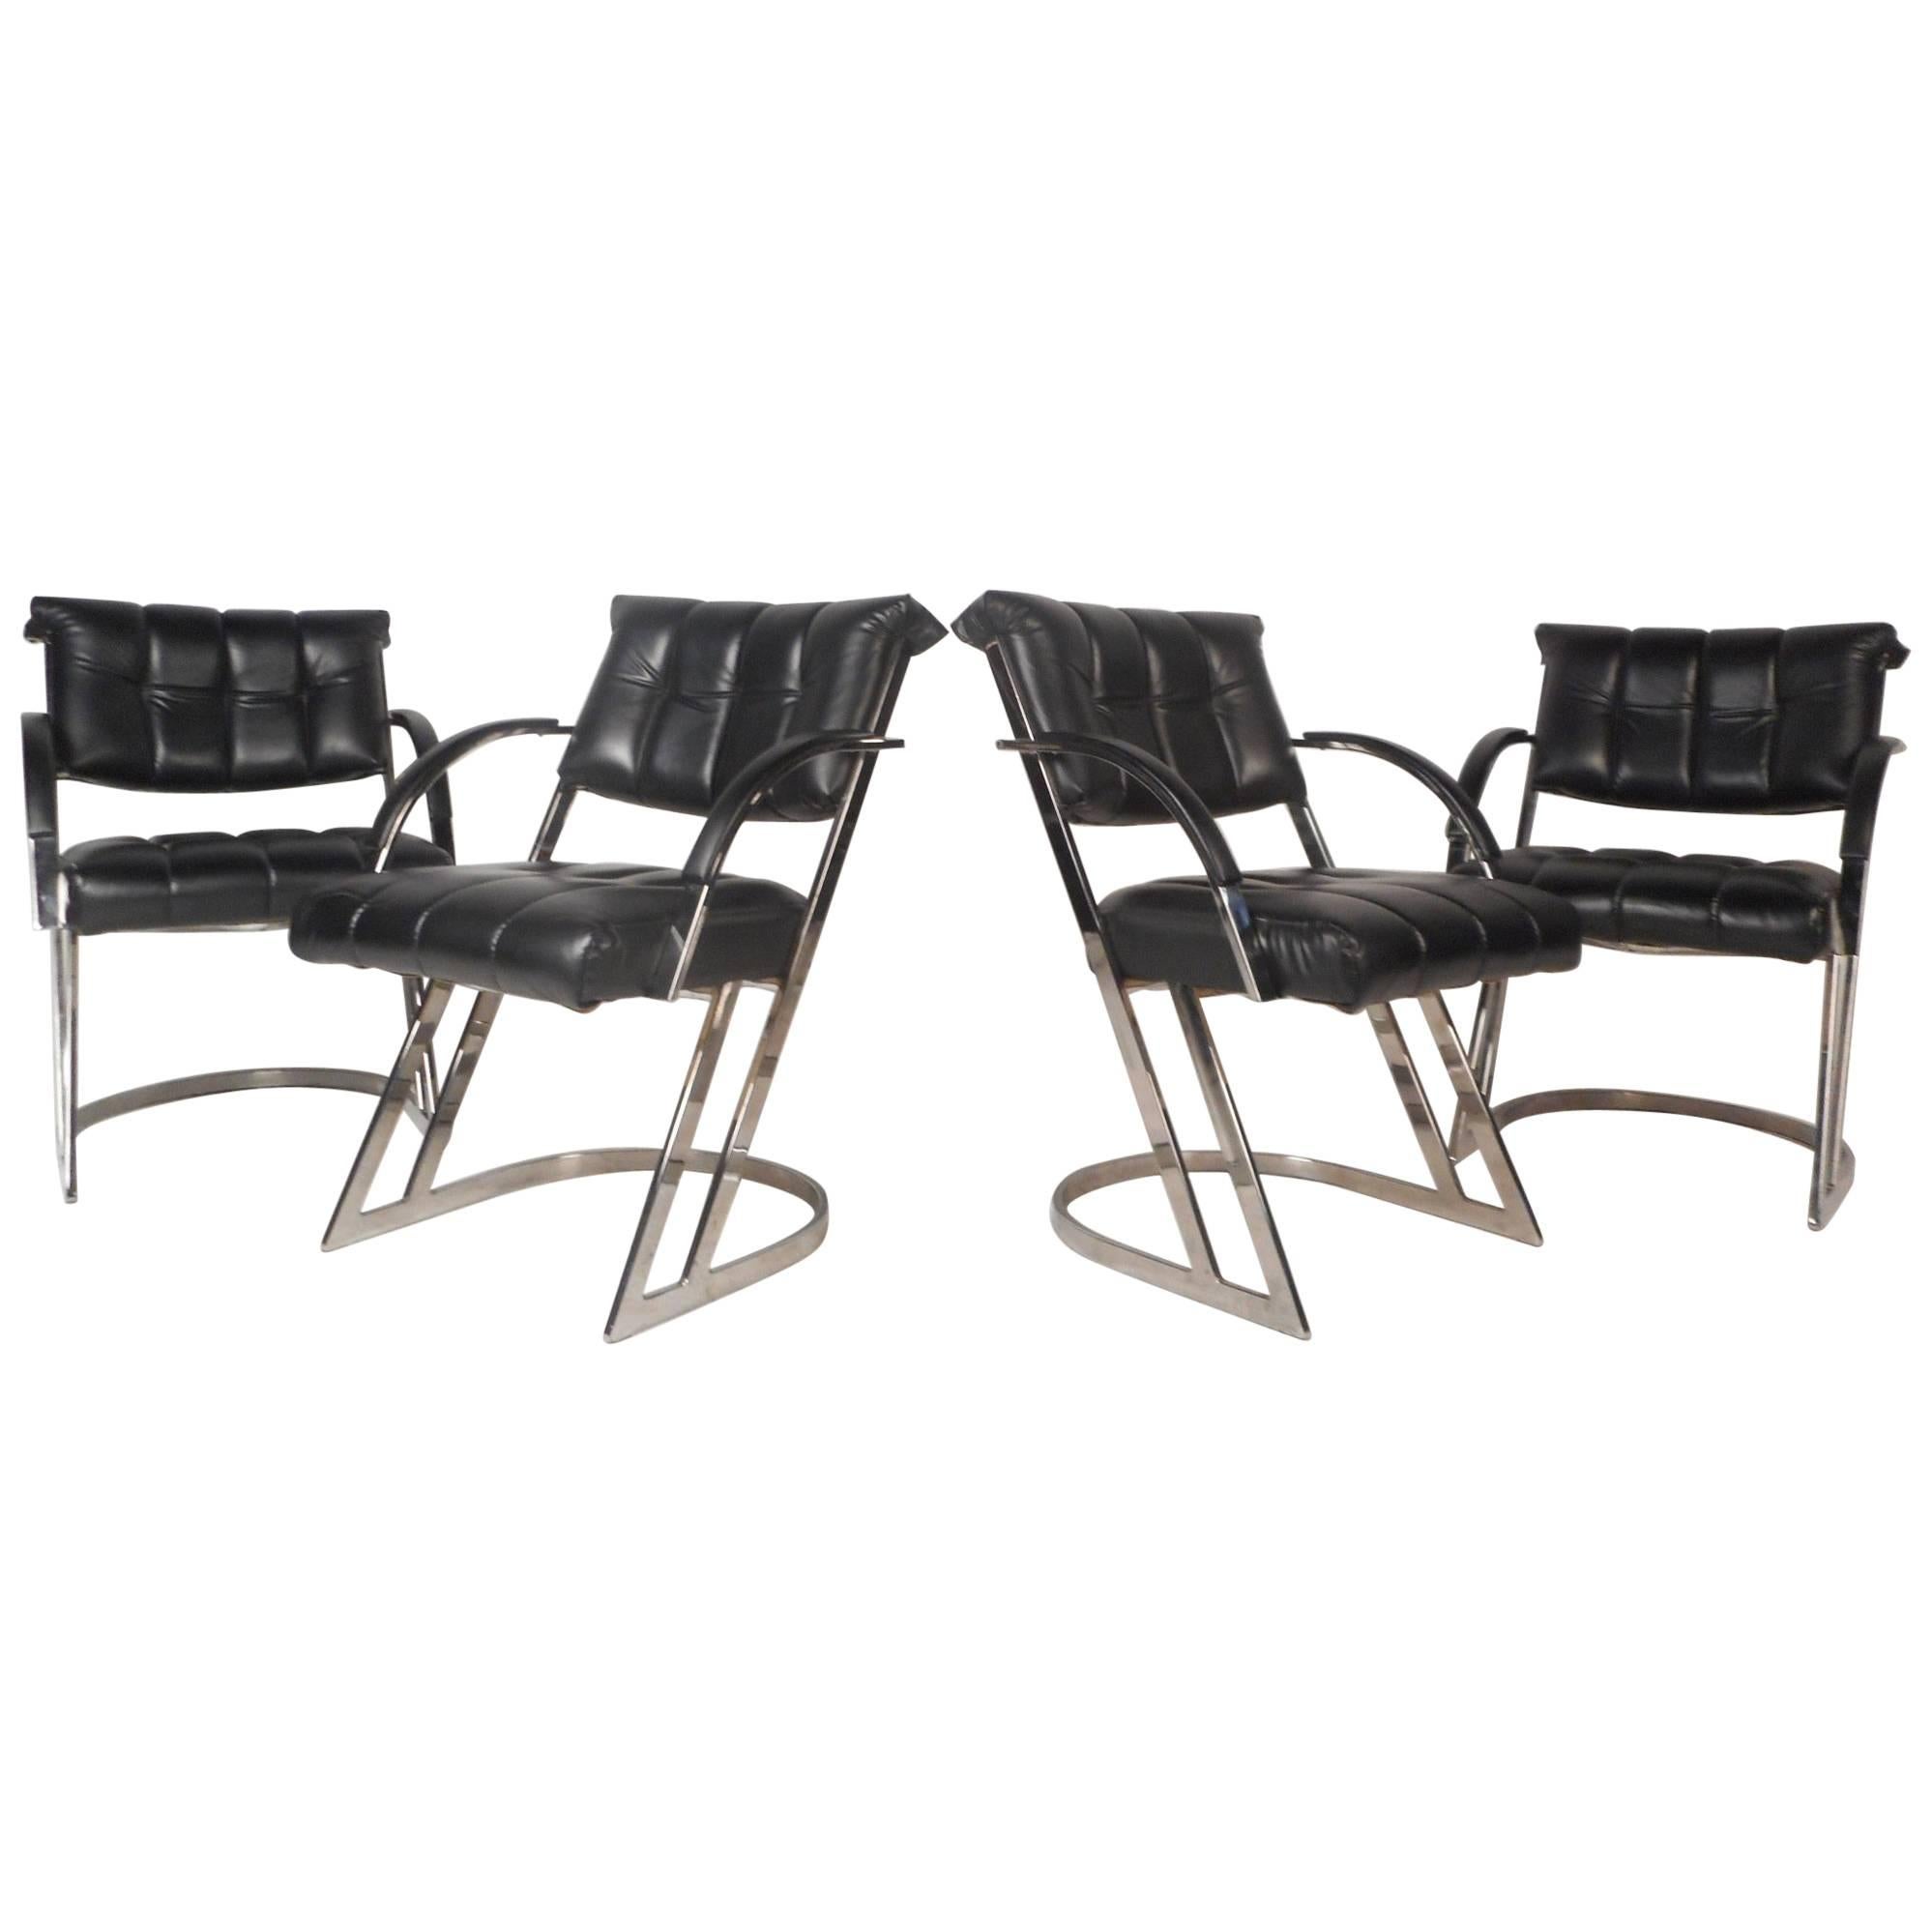 Set of Four Mid-Century Milo Baughman Style Cantilever Chairs